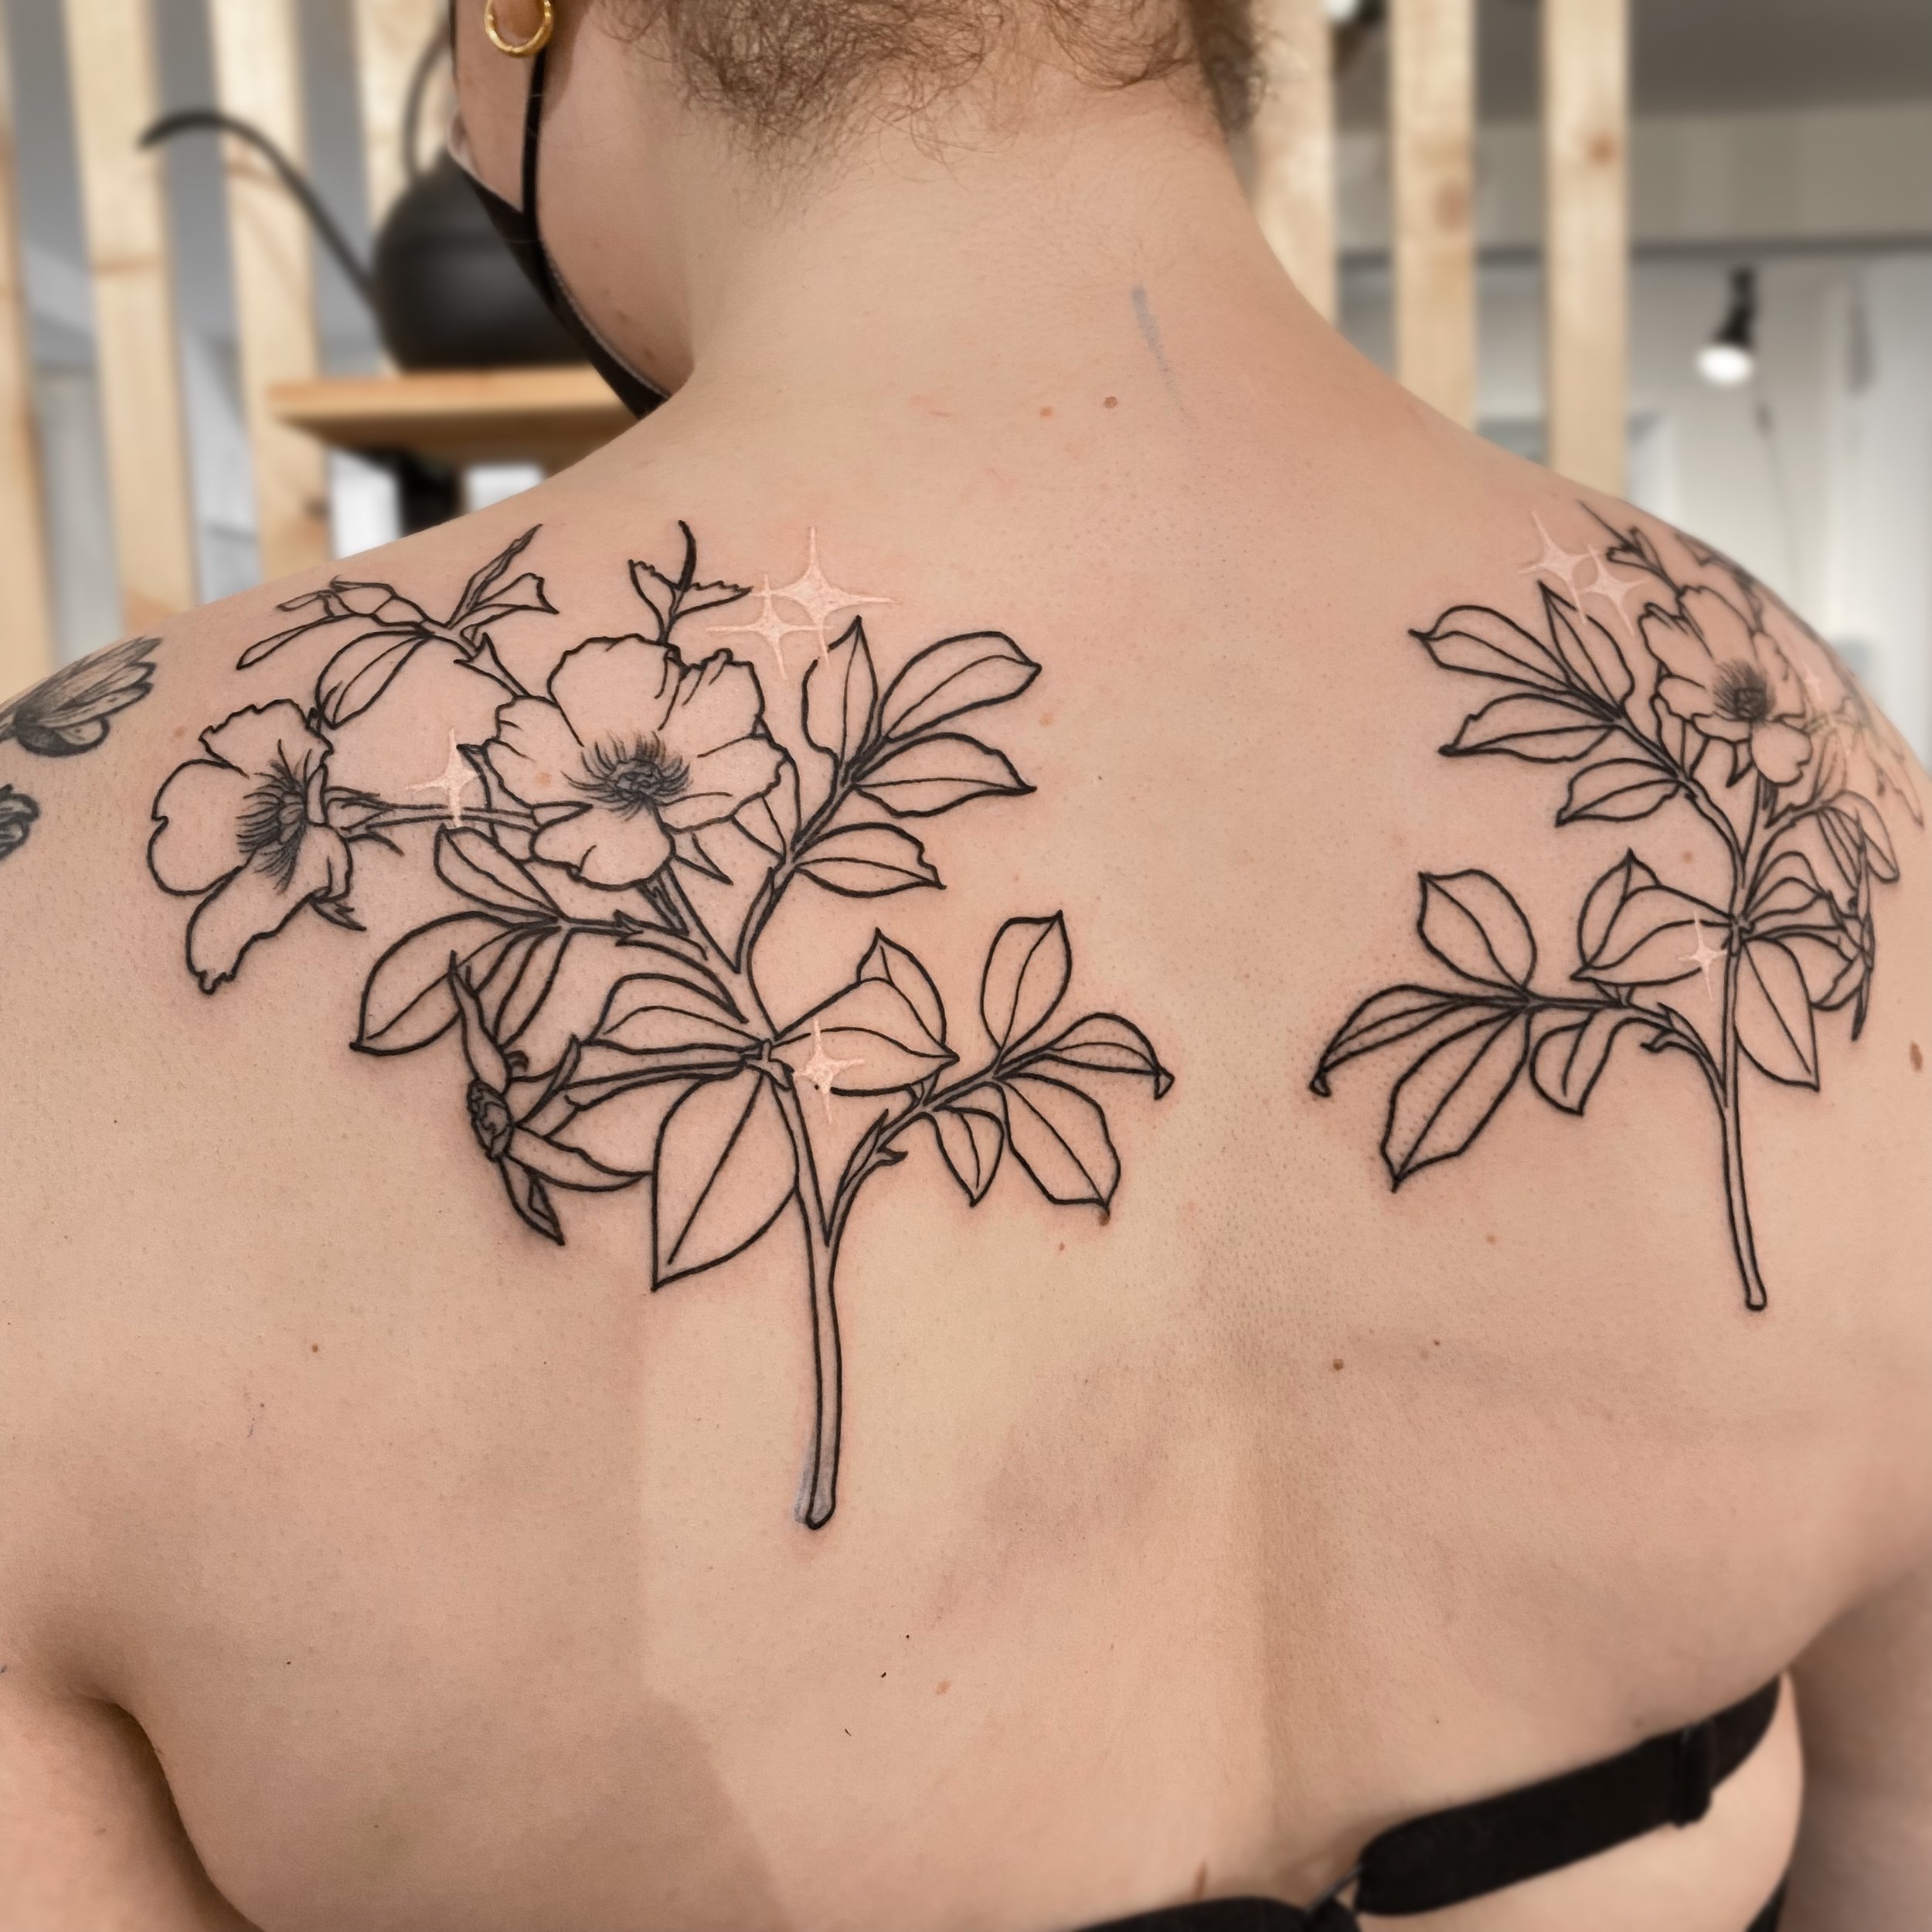 Flowers and white elements tattooed on the upper back by boy.brush.ttt.JPG